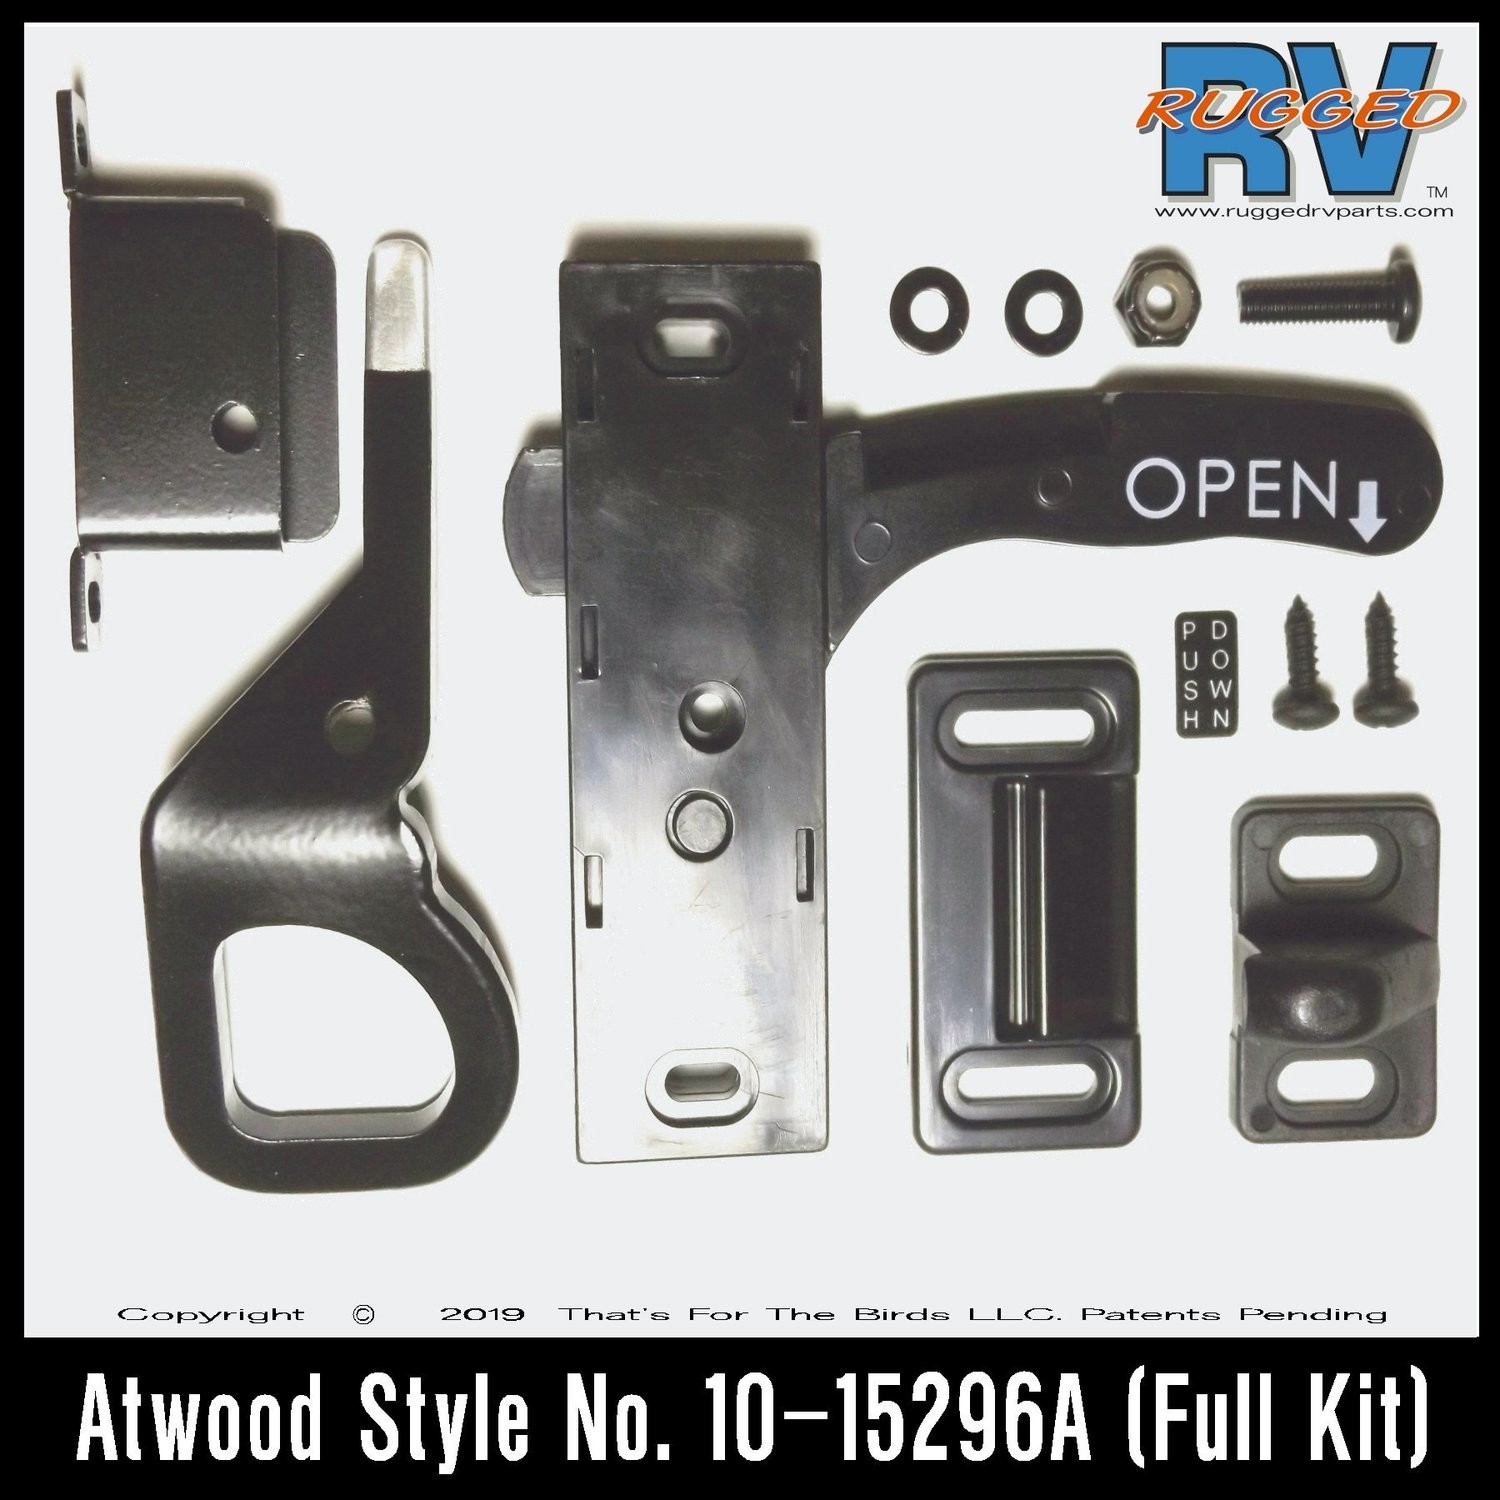 No. 10-15296A Atwood Style Handle and Latch (Full Kit)